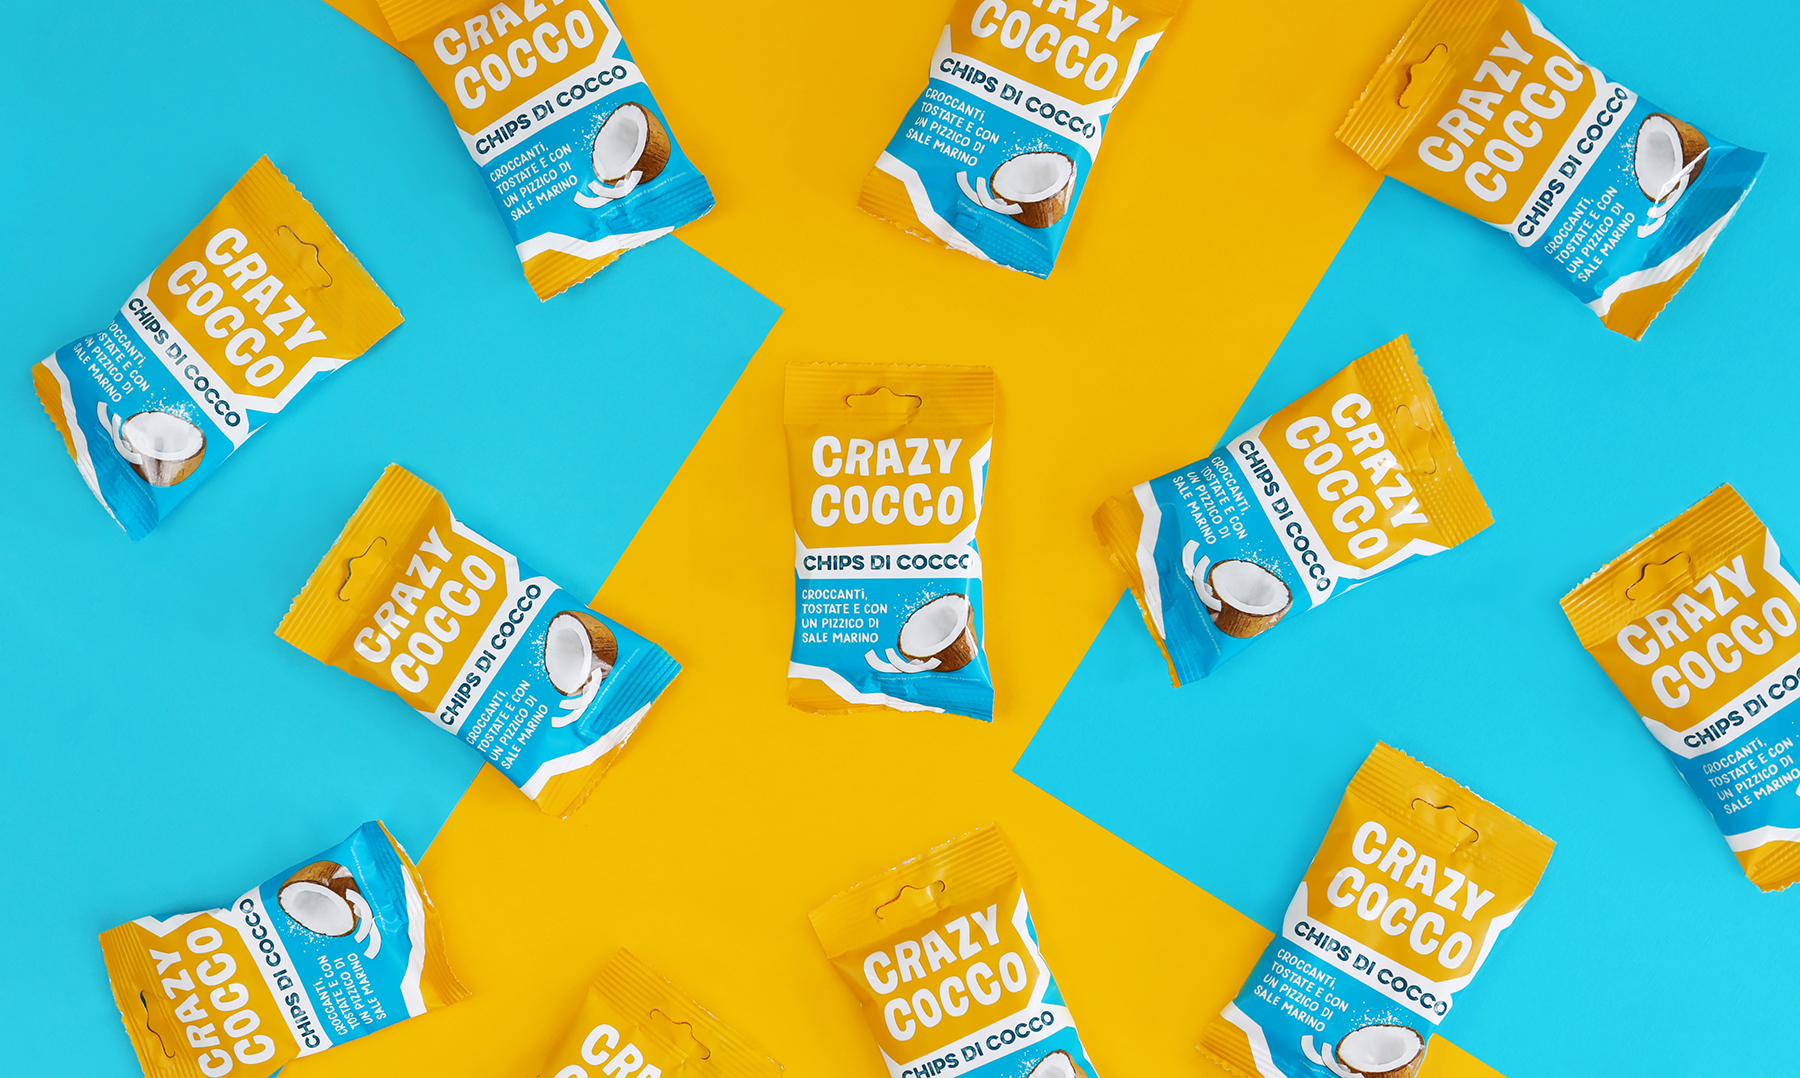 Masters of Brands Create Exciting Healthier Snack Packaging